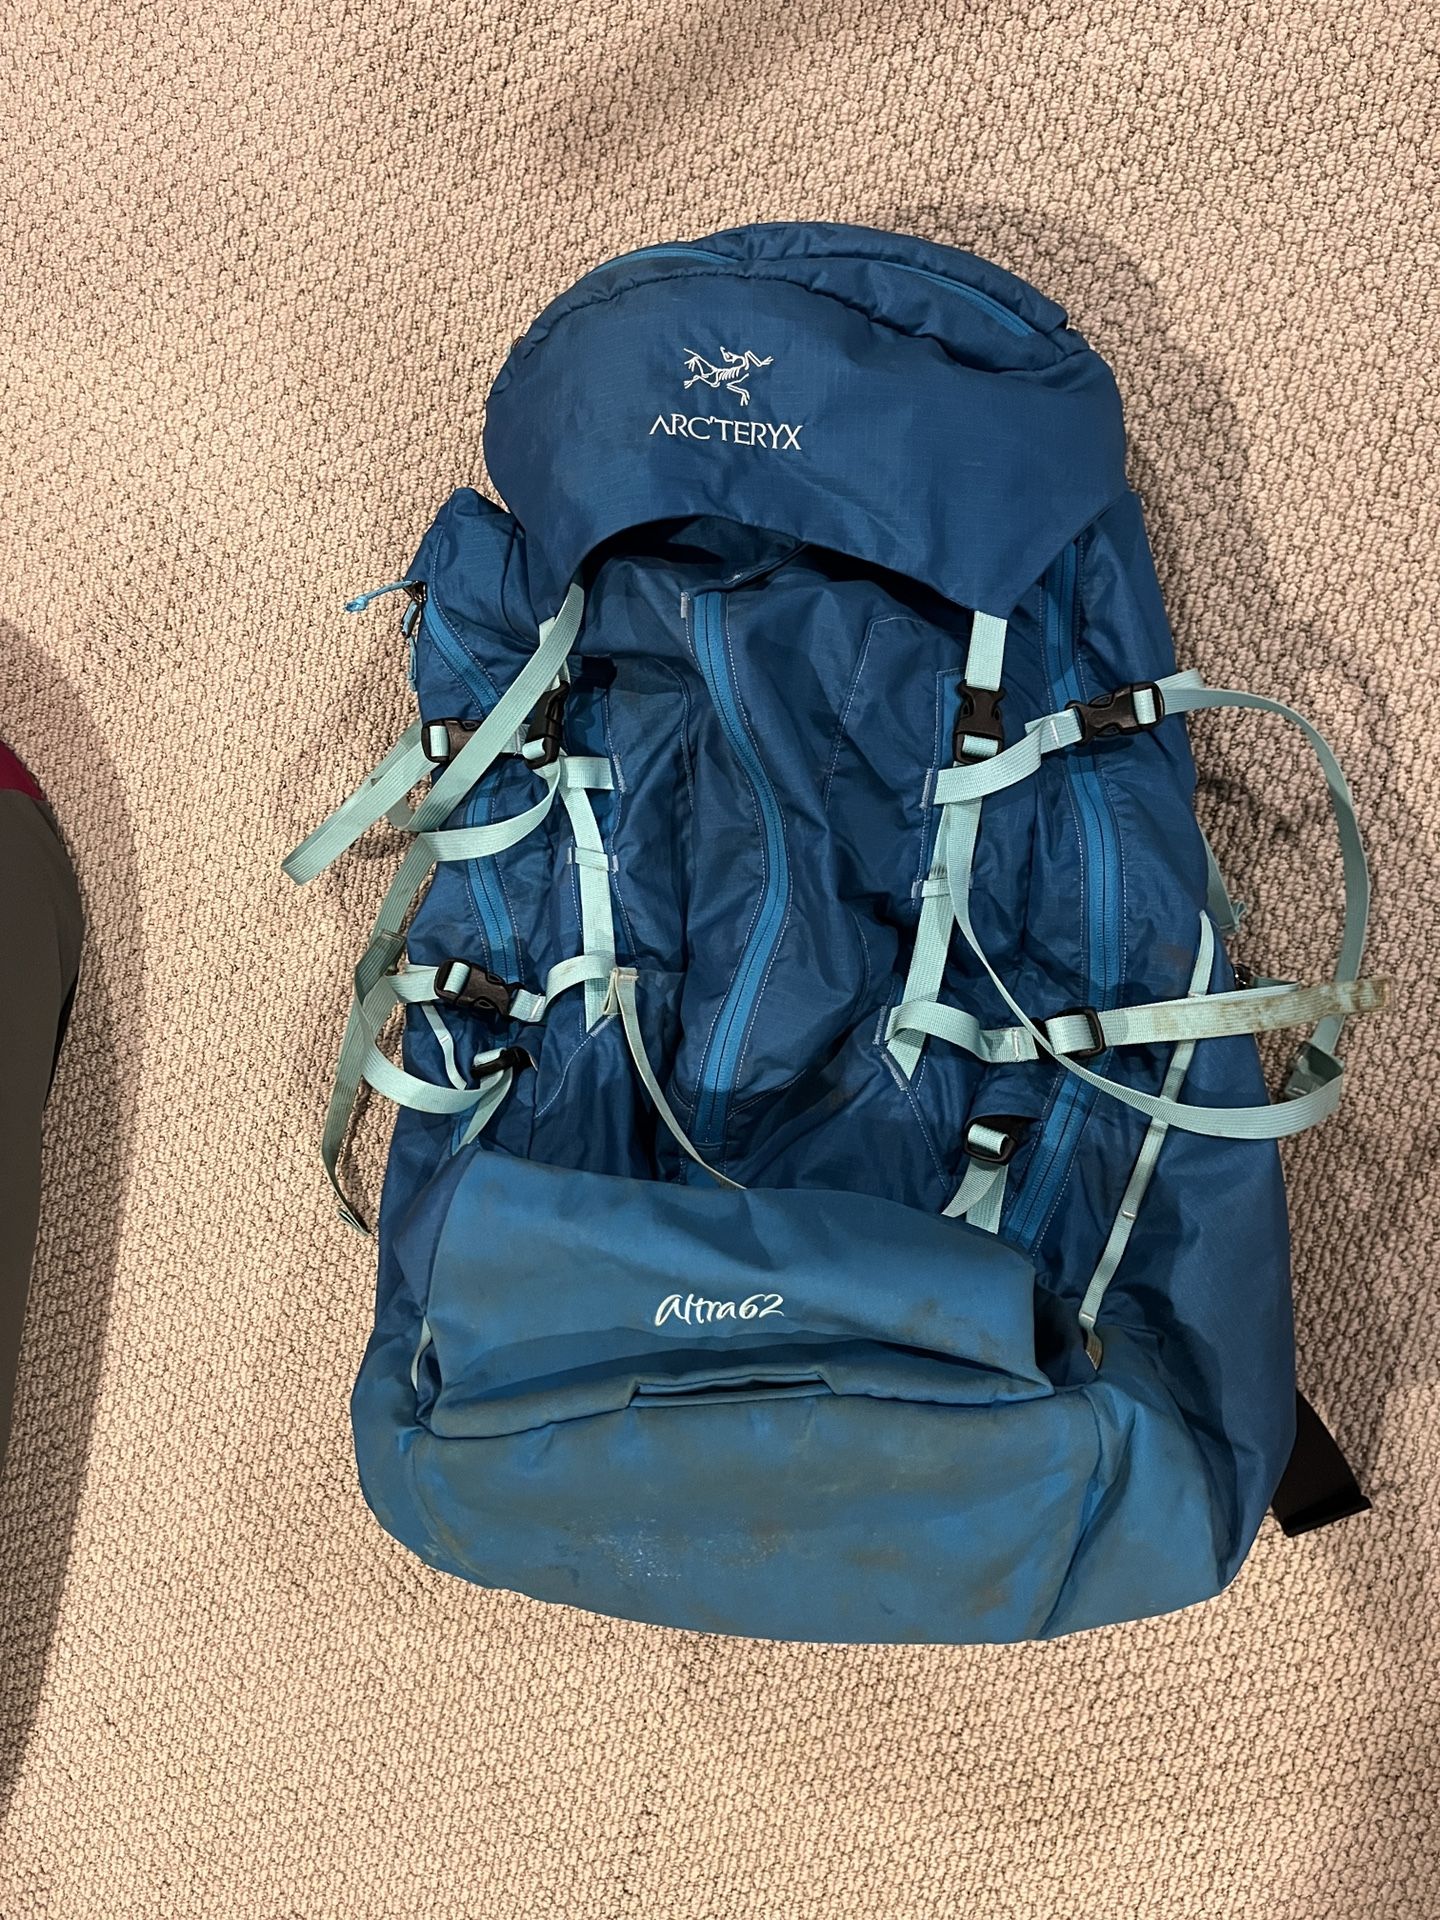 Arc’teryx Altra 62 Women’s Backpacking Pack